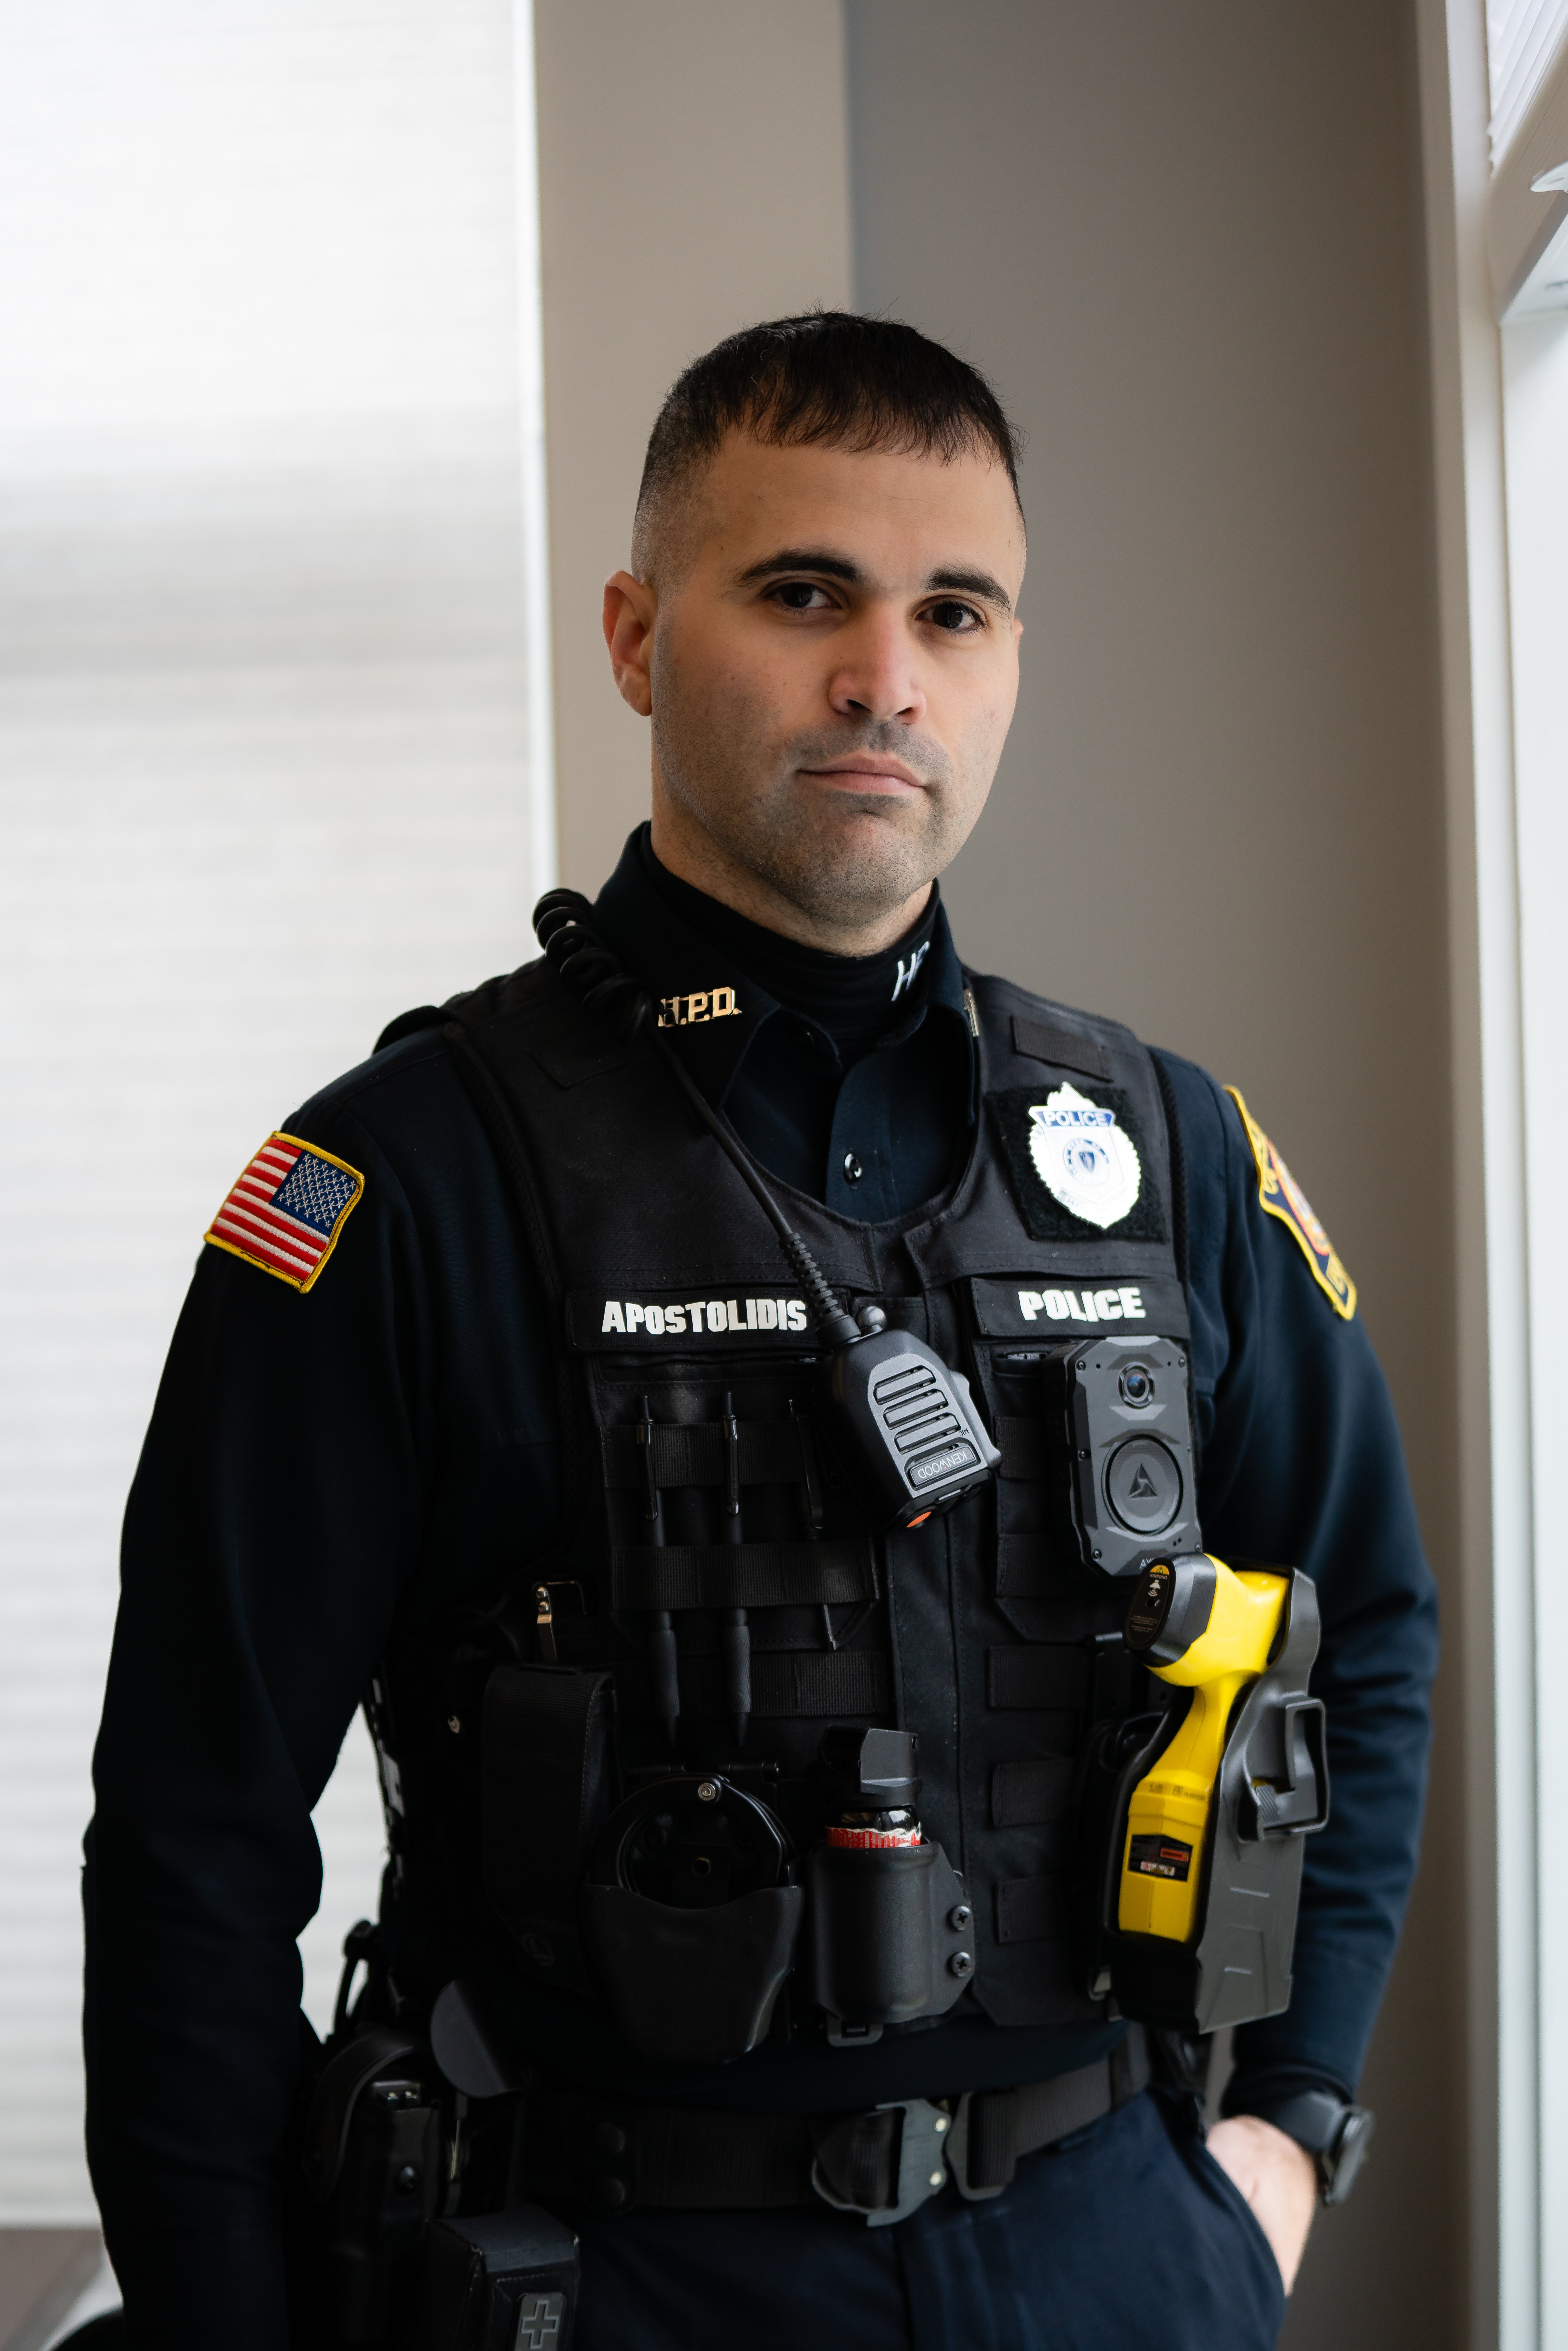 A male Holbrook Police Department member wears a body camera on his uniform.